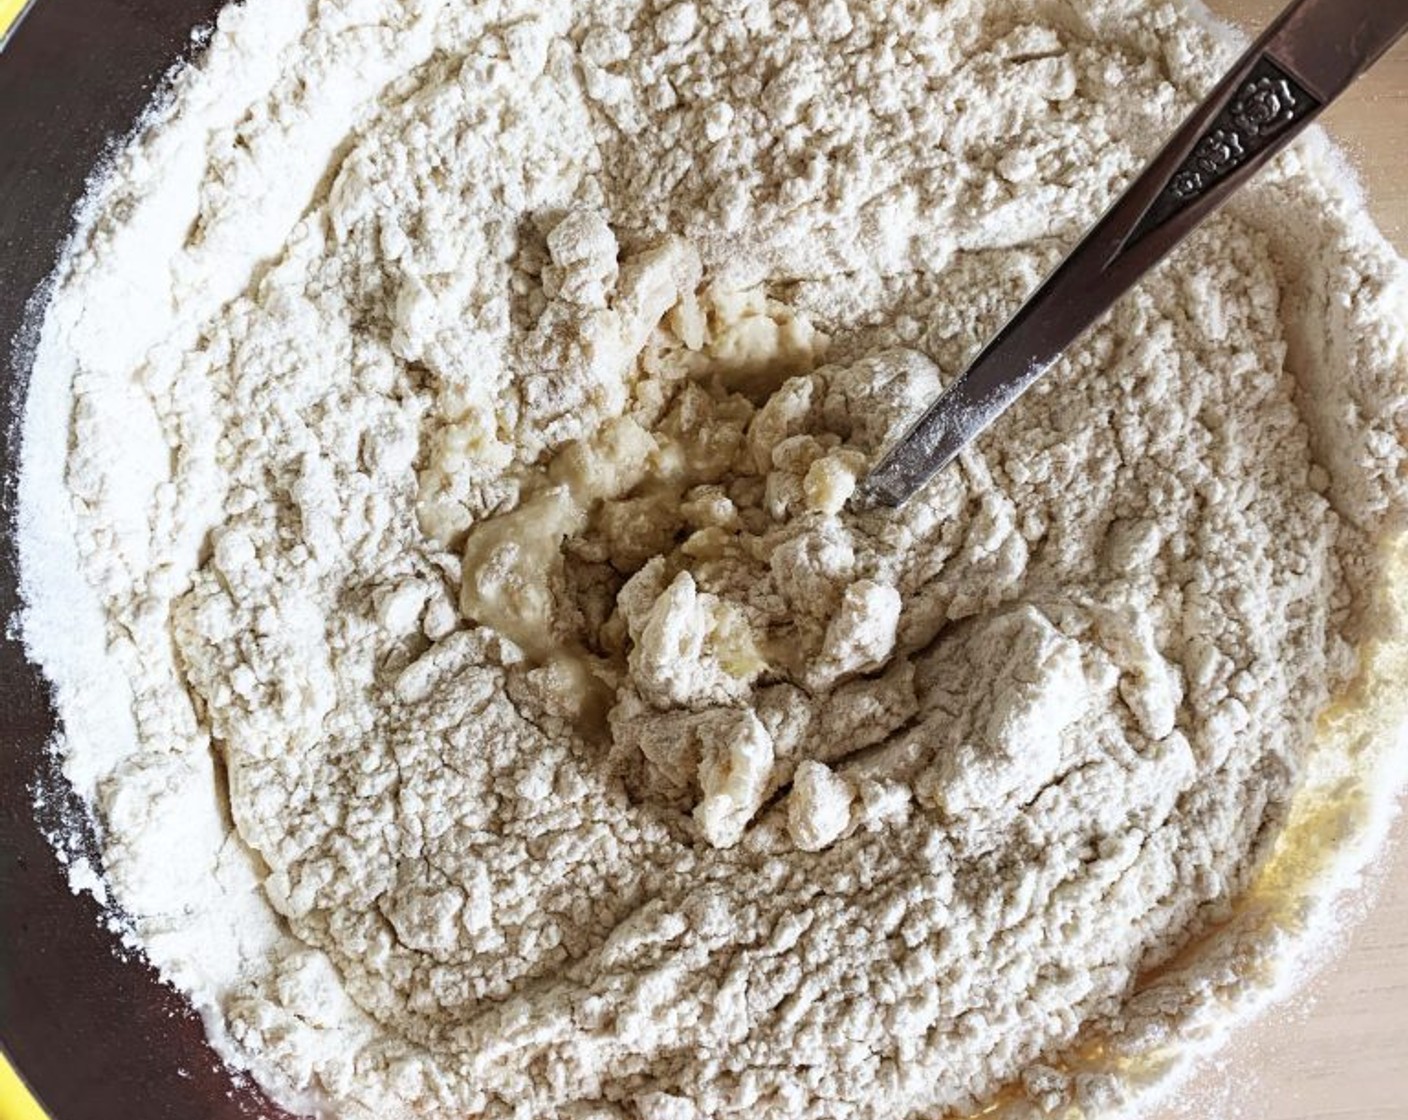 step 2 In a larger bowl dissolve poolish in Water (5 oz), add the remaining Type 0 Flour (1 1/4 cups), Spelt Flour (2/3 cup), Salt (1 tsp), and using a fork mix the ingredients together. Try to make movements that from the outside of the bowl, bring the dough toward the inside.